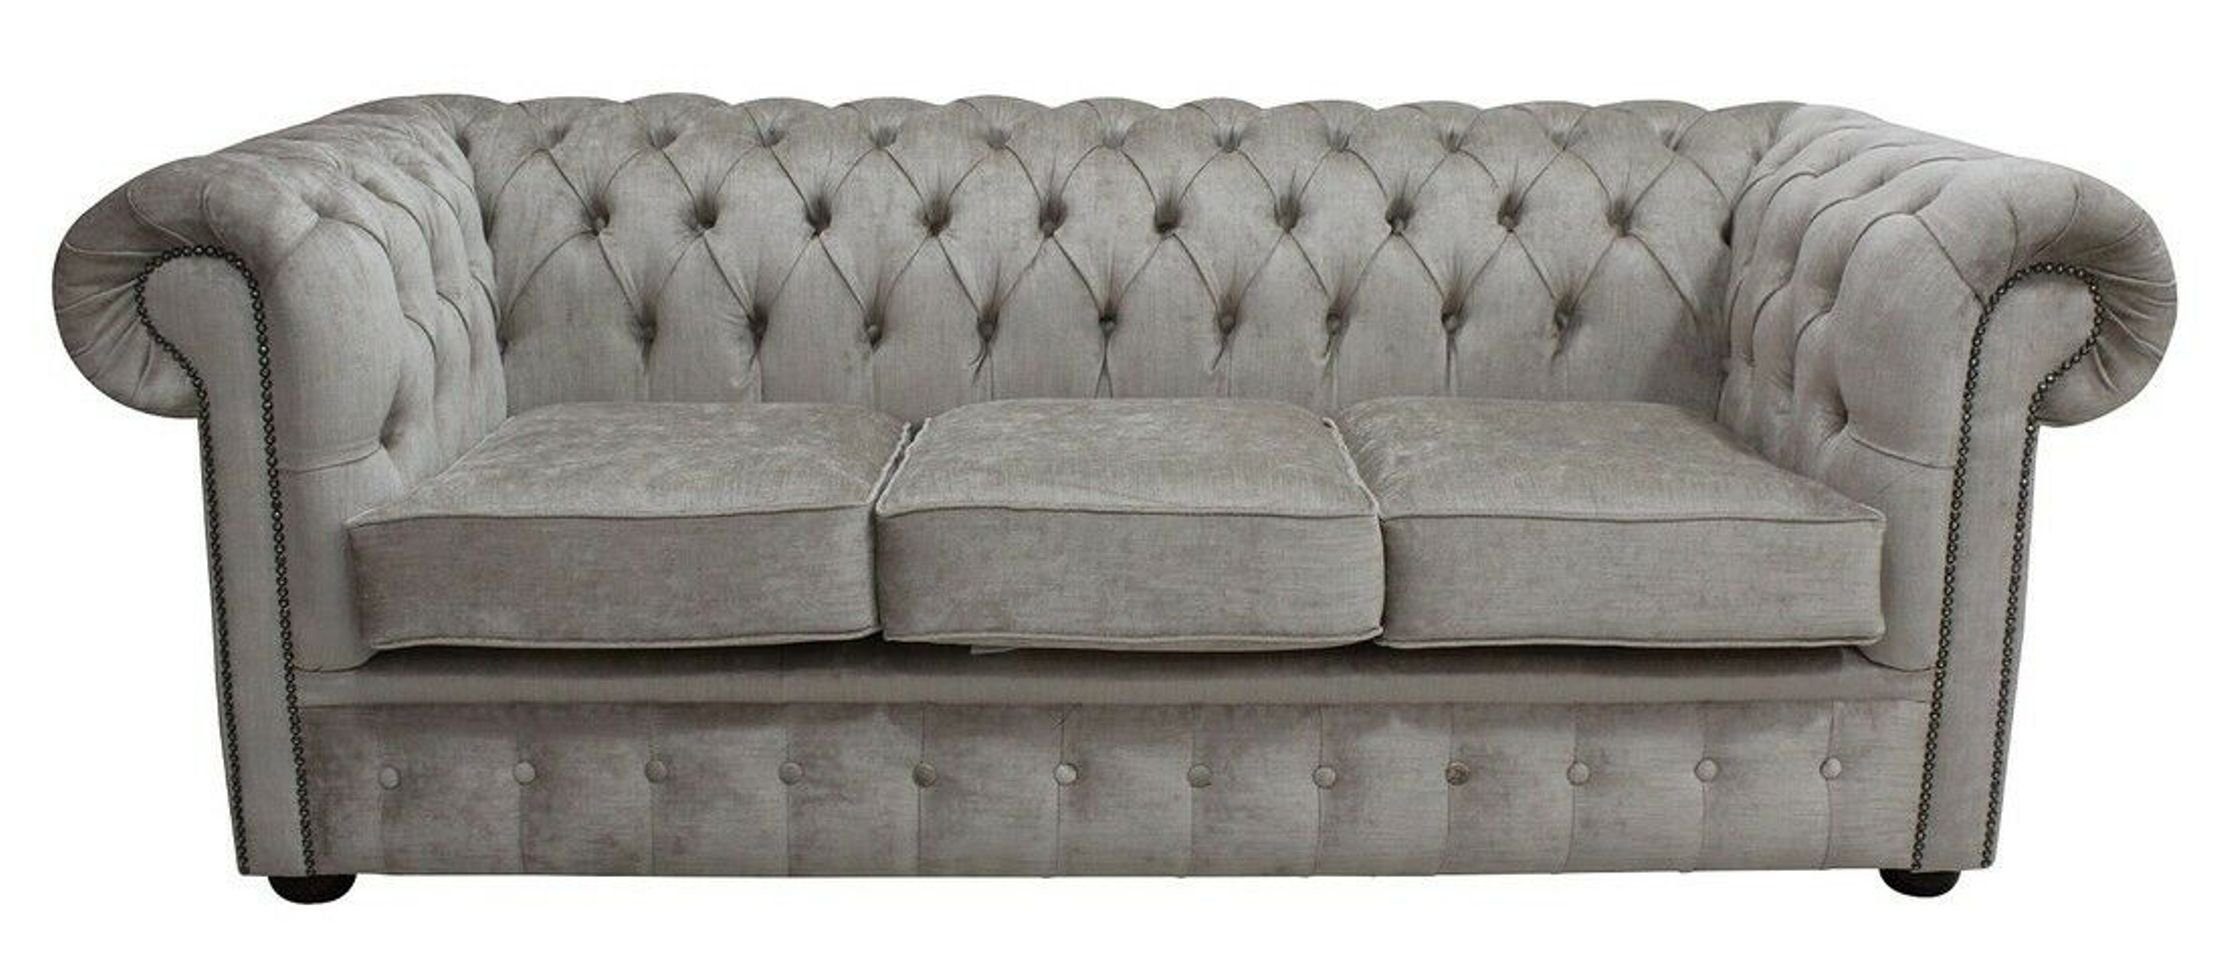 Design Sofa Chesterfield Chesterfield-Sofa, Luxus JVmoebel Polster Couch